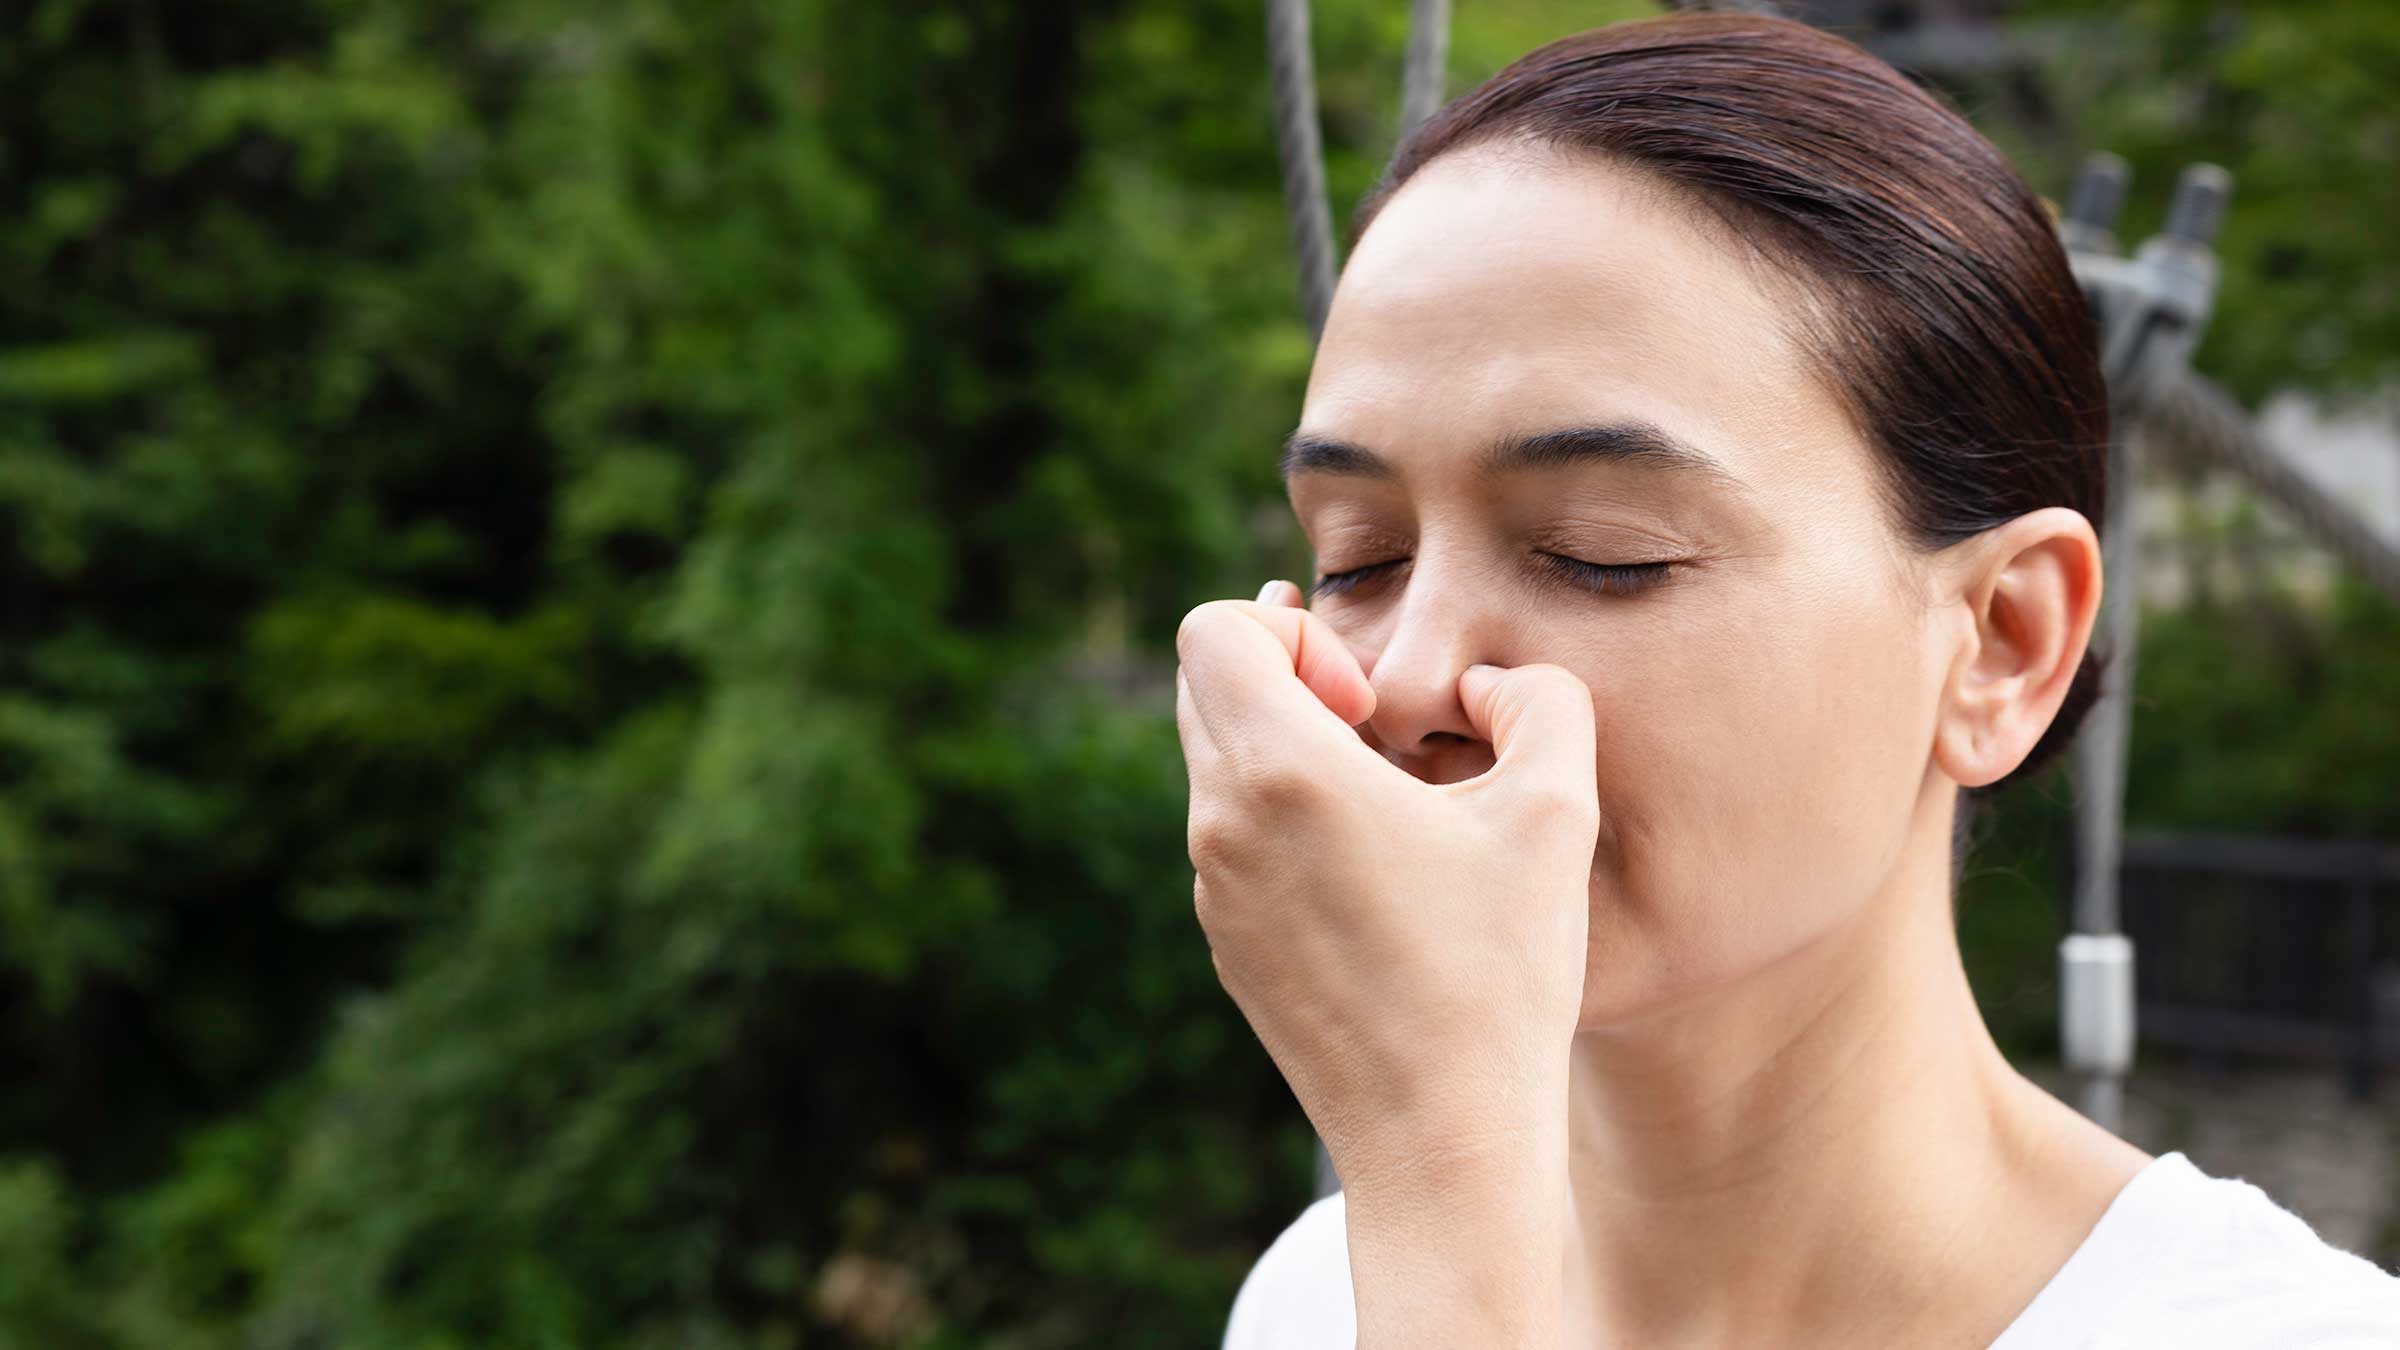 Woman doing breathing exercise with her eyes closed